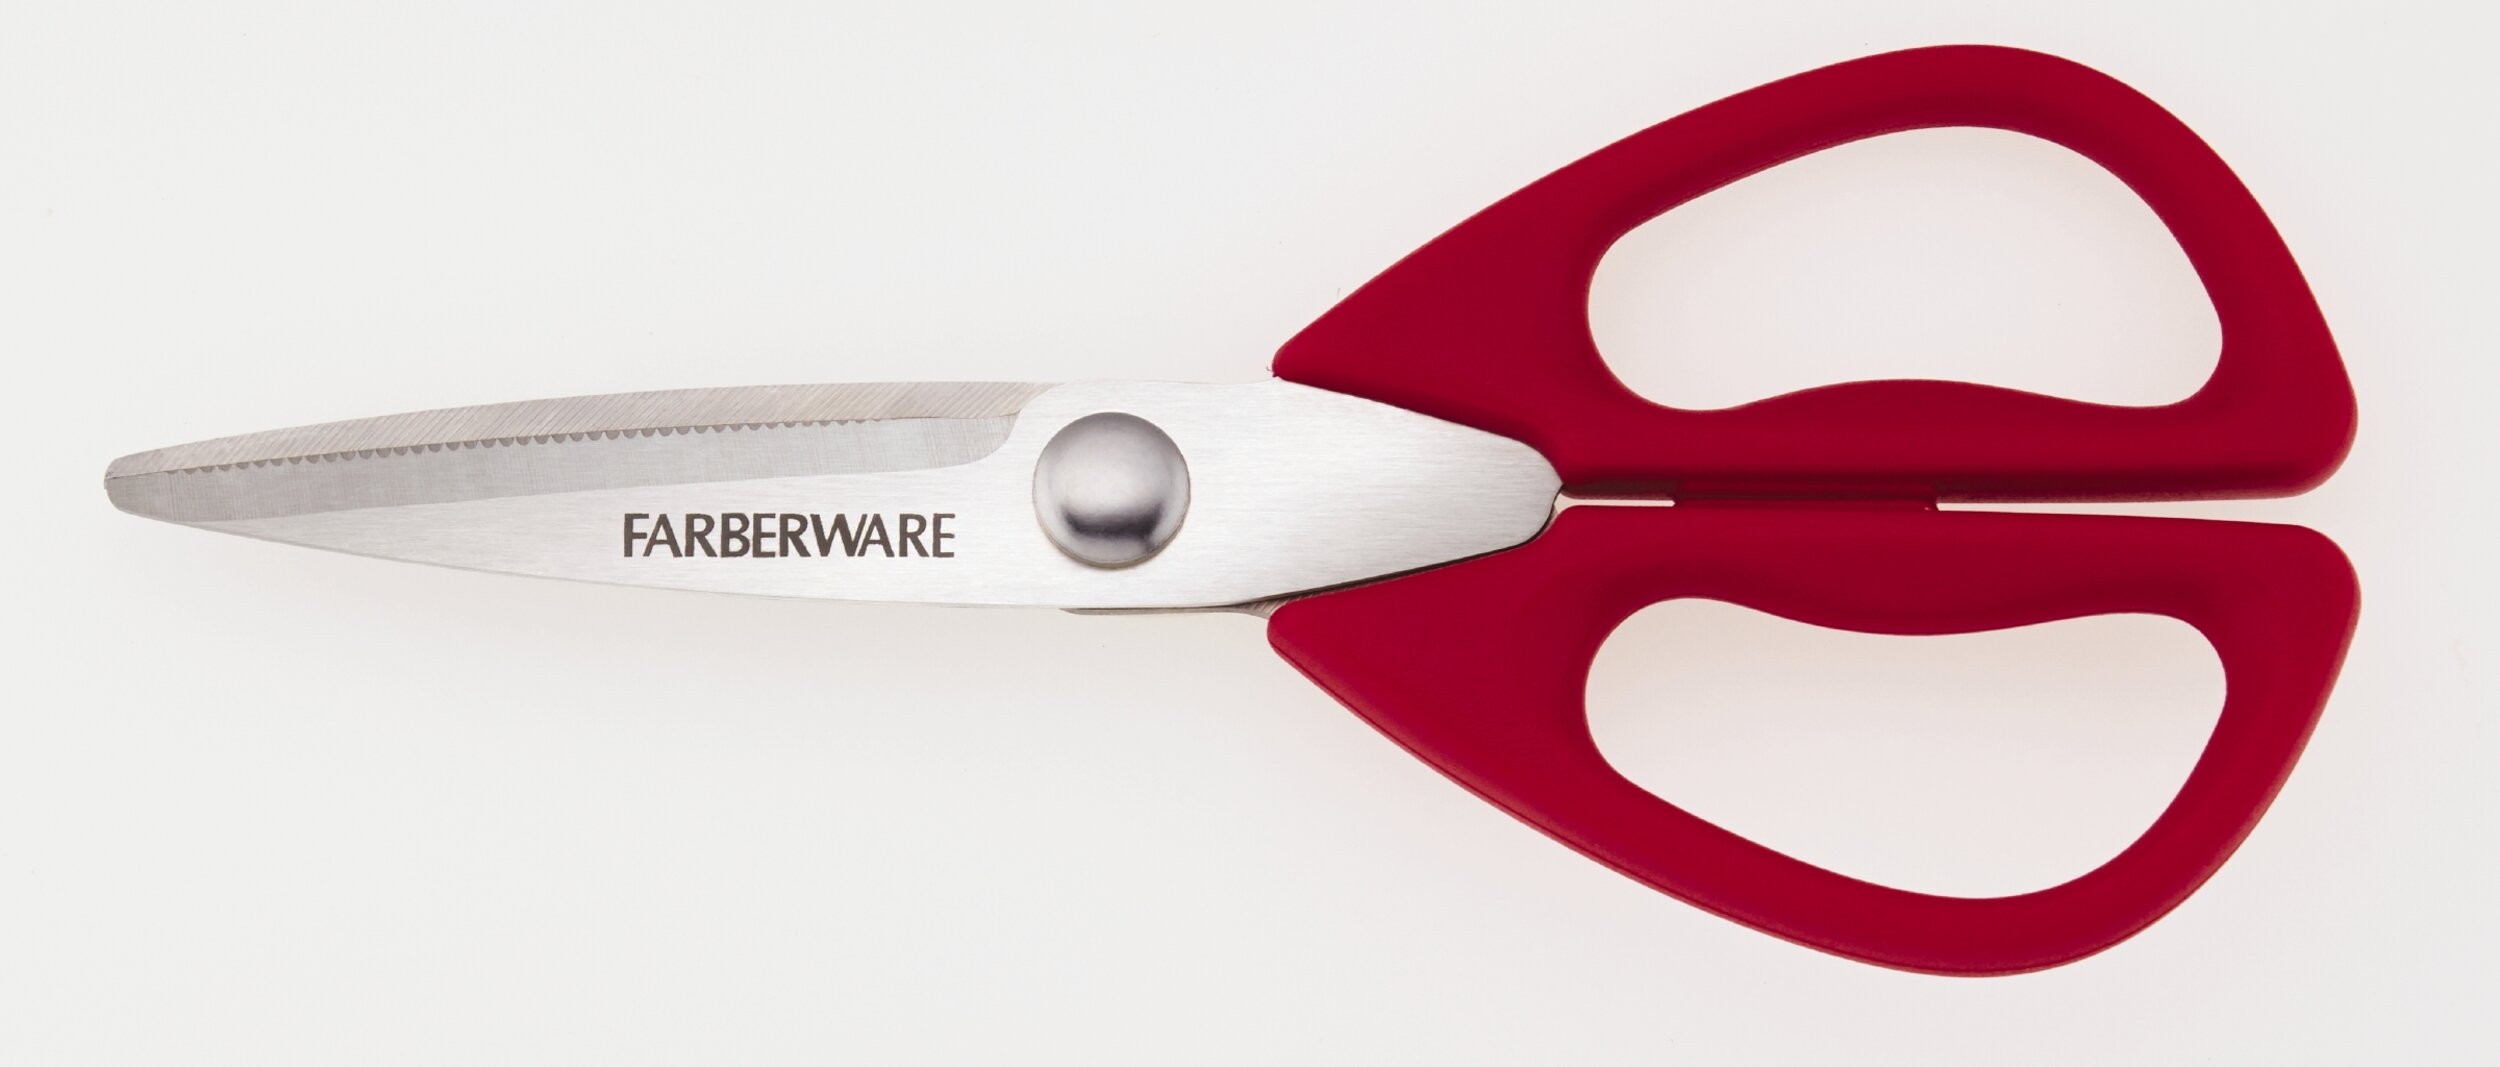 Farberware 4 in 1 Shears with Aqua and Gray Handle, Blue